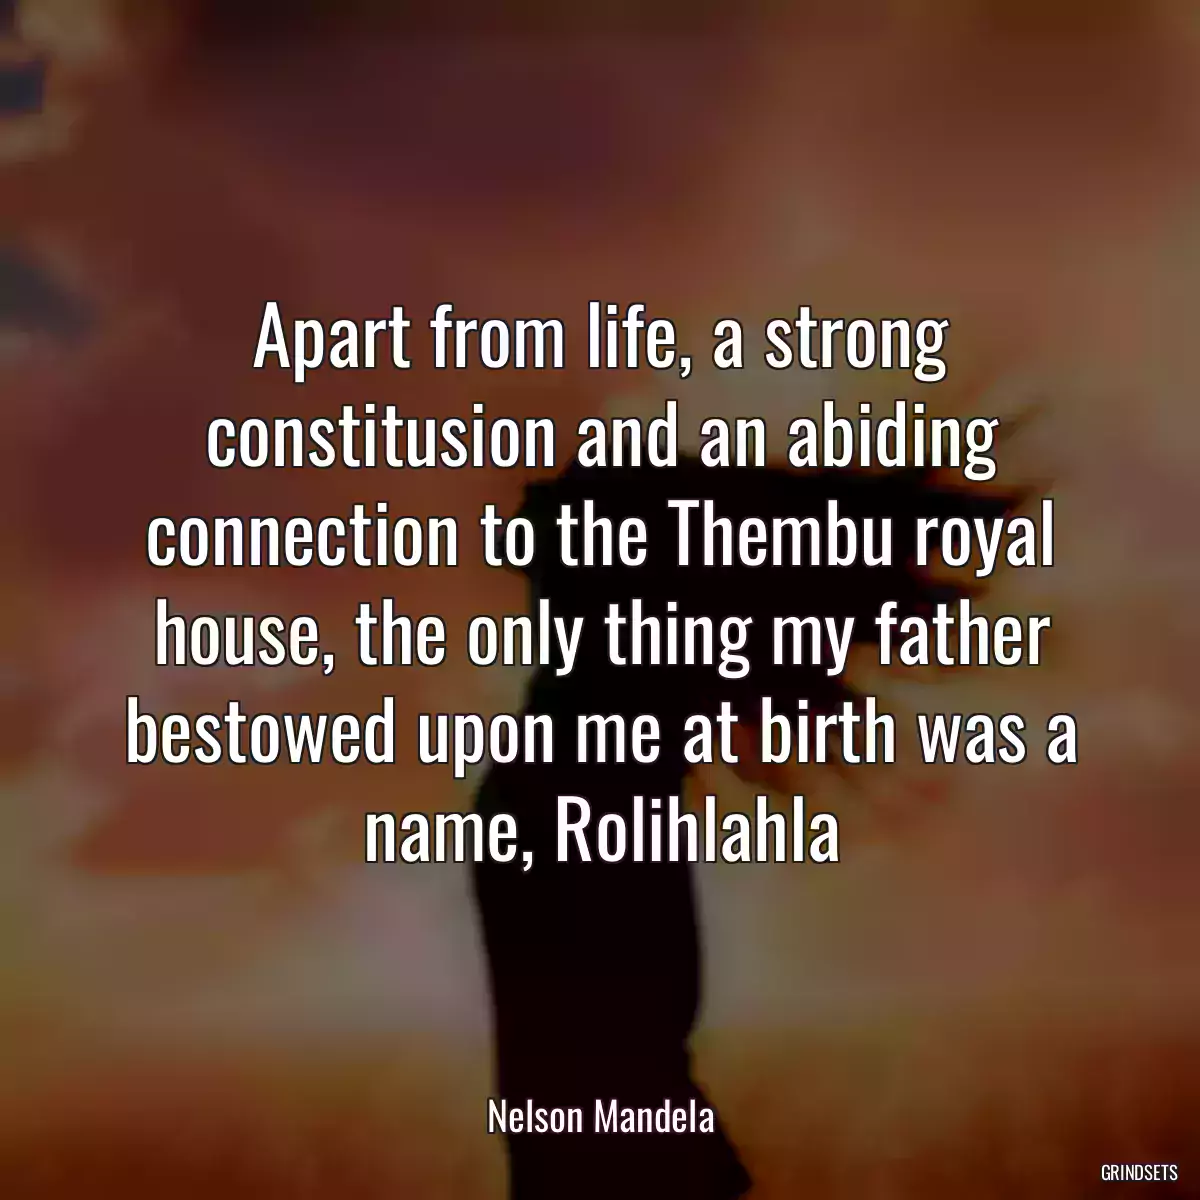 Apart from life, a strong constitusion and an abiding connection to the Thembu royal house, the only thing my father bestowed upon me at birth was a name, Rolihlahla